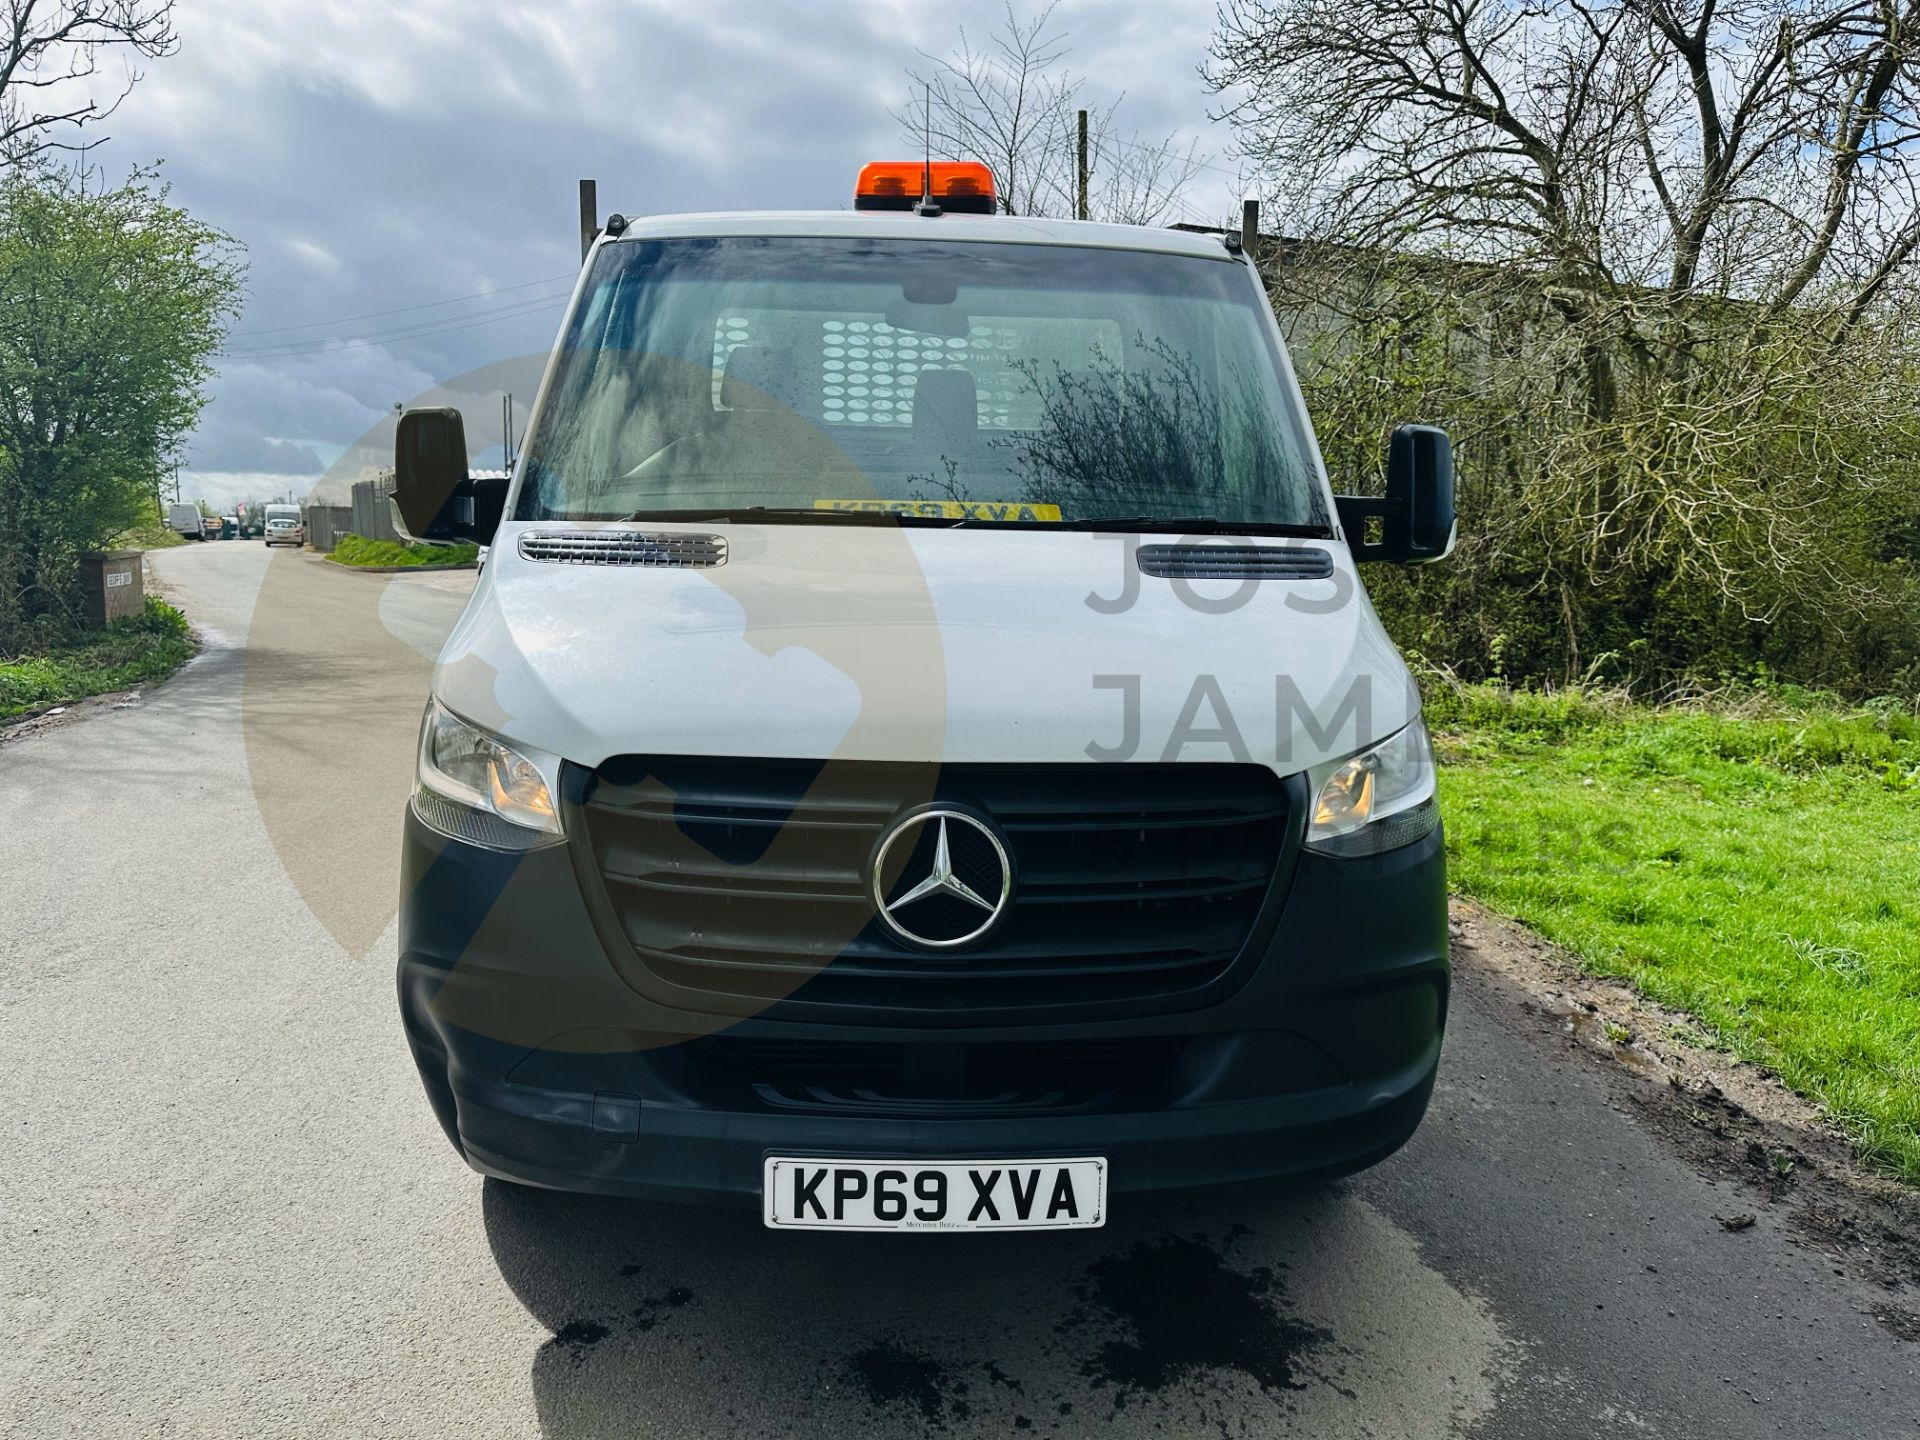 (On Sale) MERCEDES SPRINTER 316CDI 3.5T DROPSIDE TRUCK WITH ELECTRIC TAIL LIFT- 2020 MODEL - FSH - Image 3 of 30